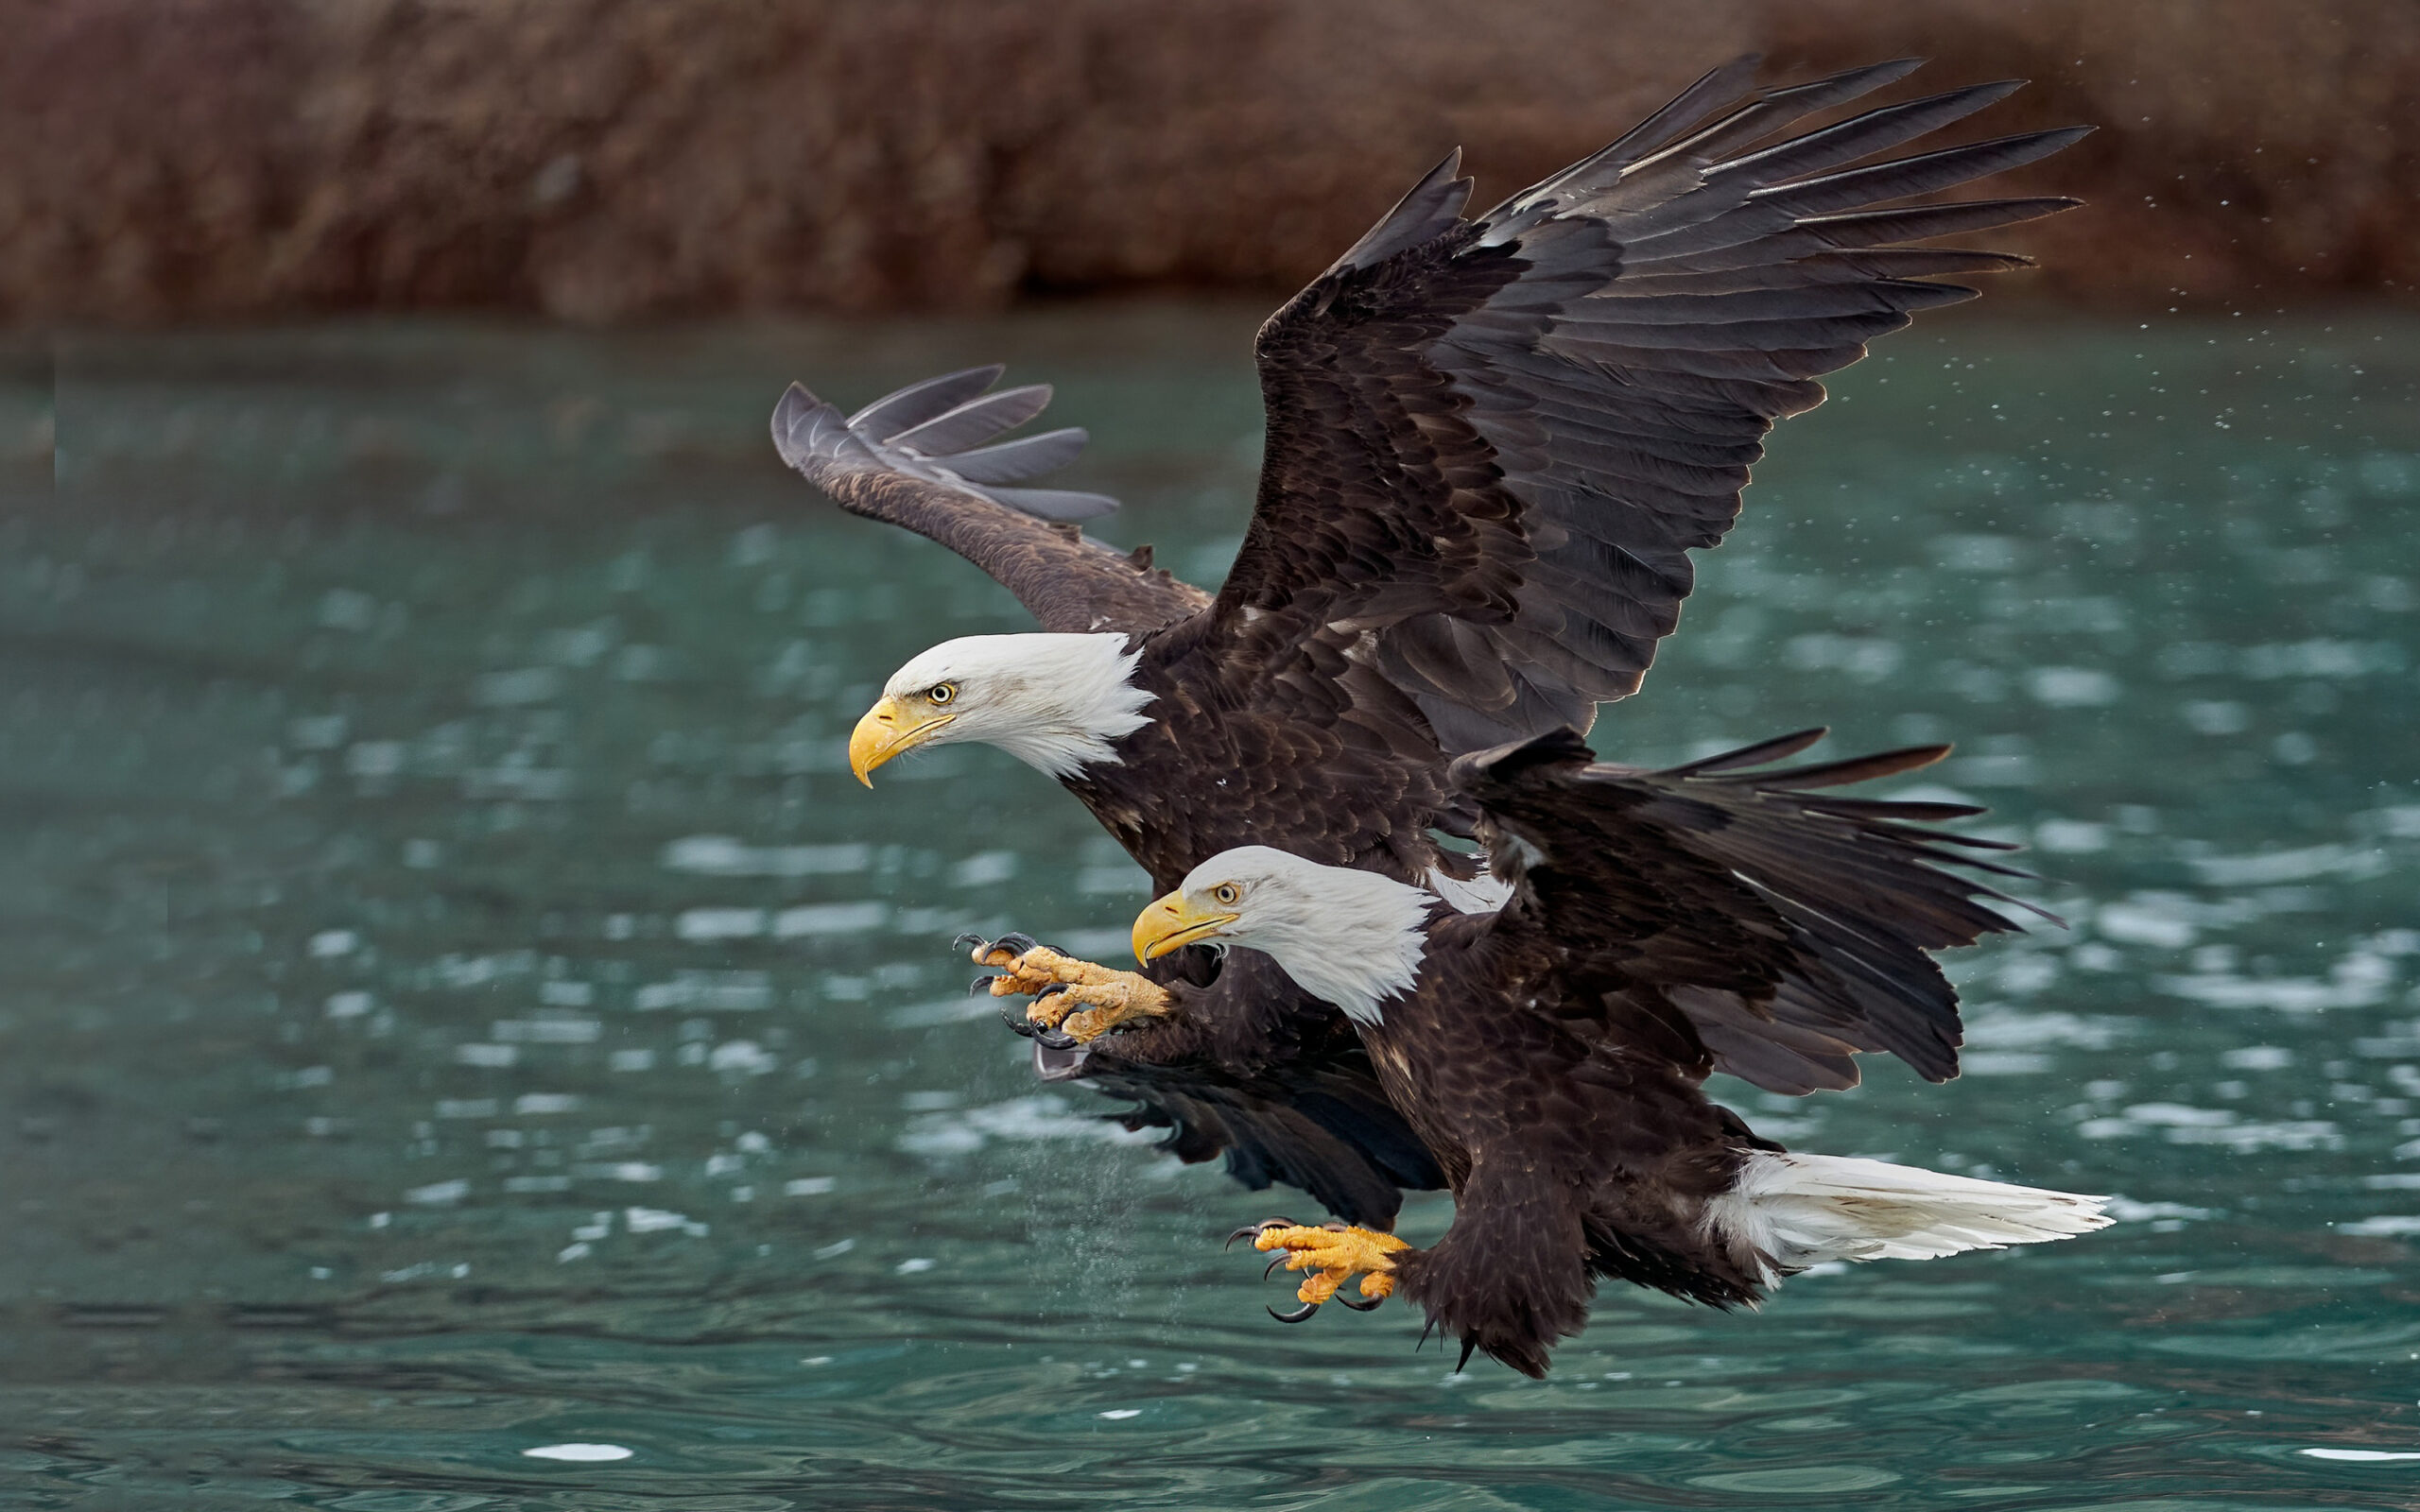 USFWS Tries Again to Make Eagle Take Permitting Process Work for Stakeholders and Wildlife